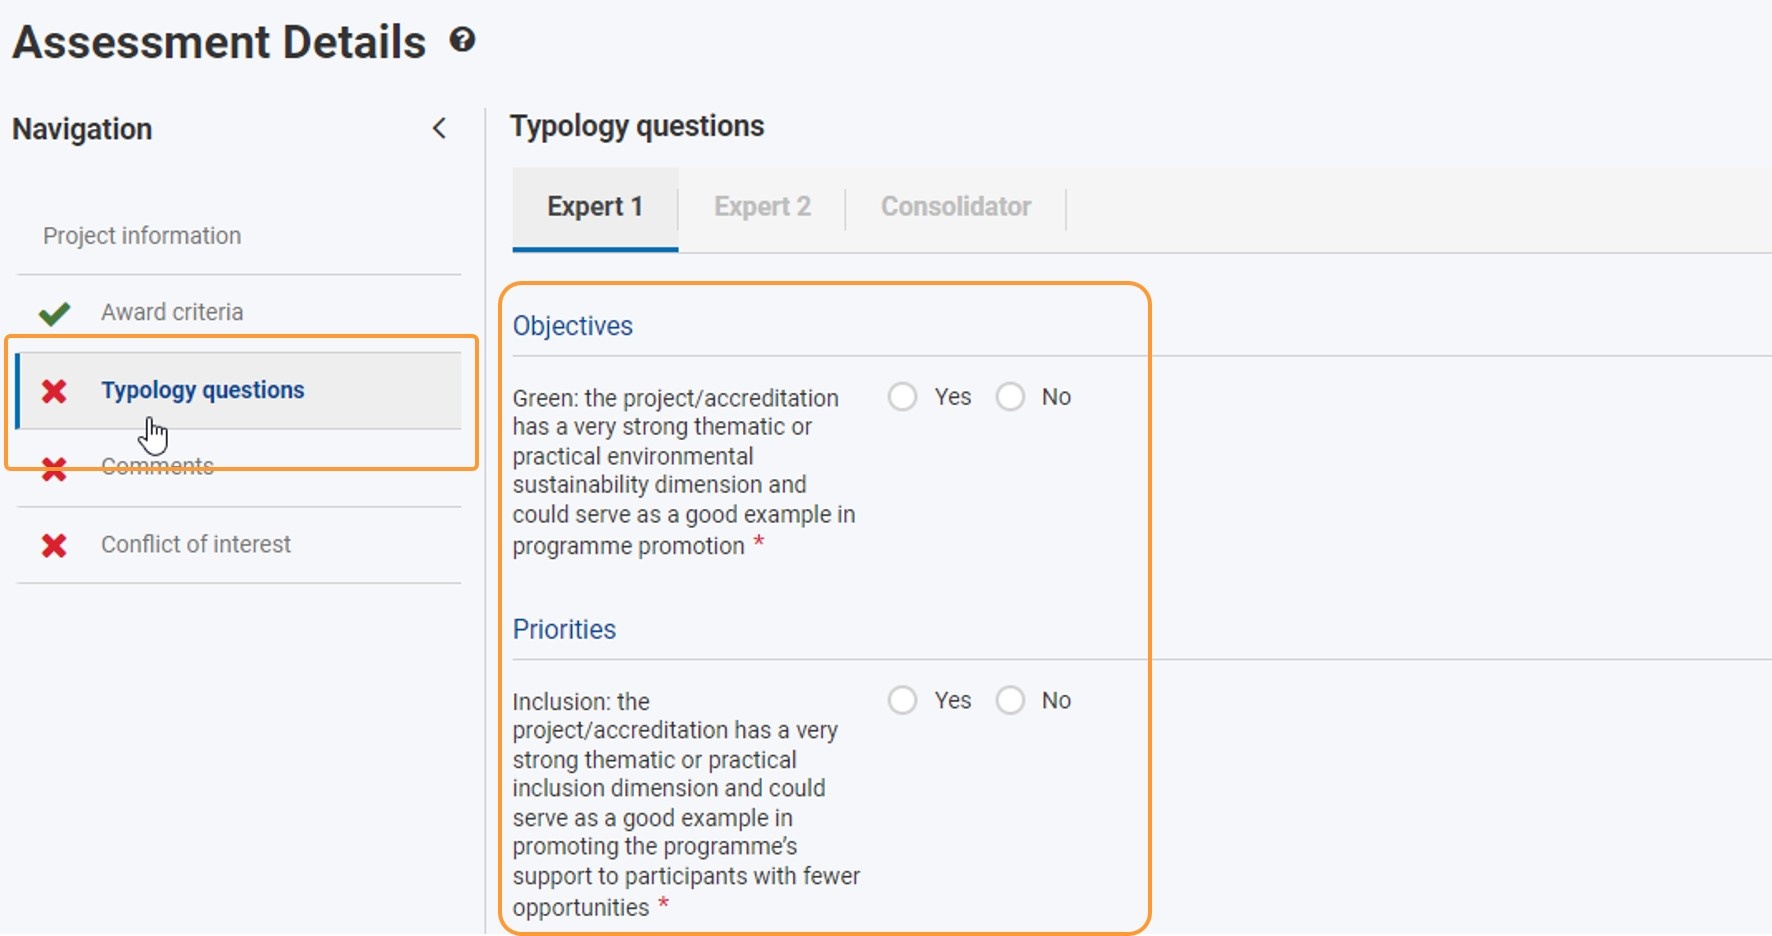 Access the Typology questions from the Navigation menu and answer the questions